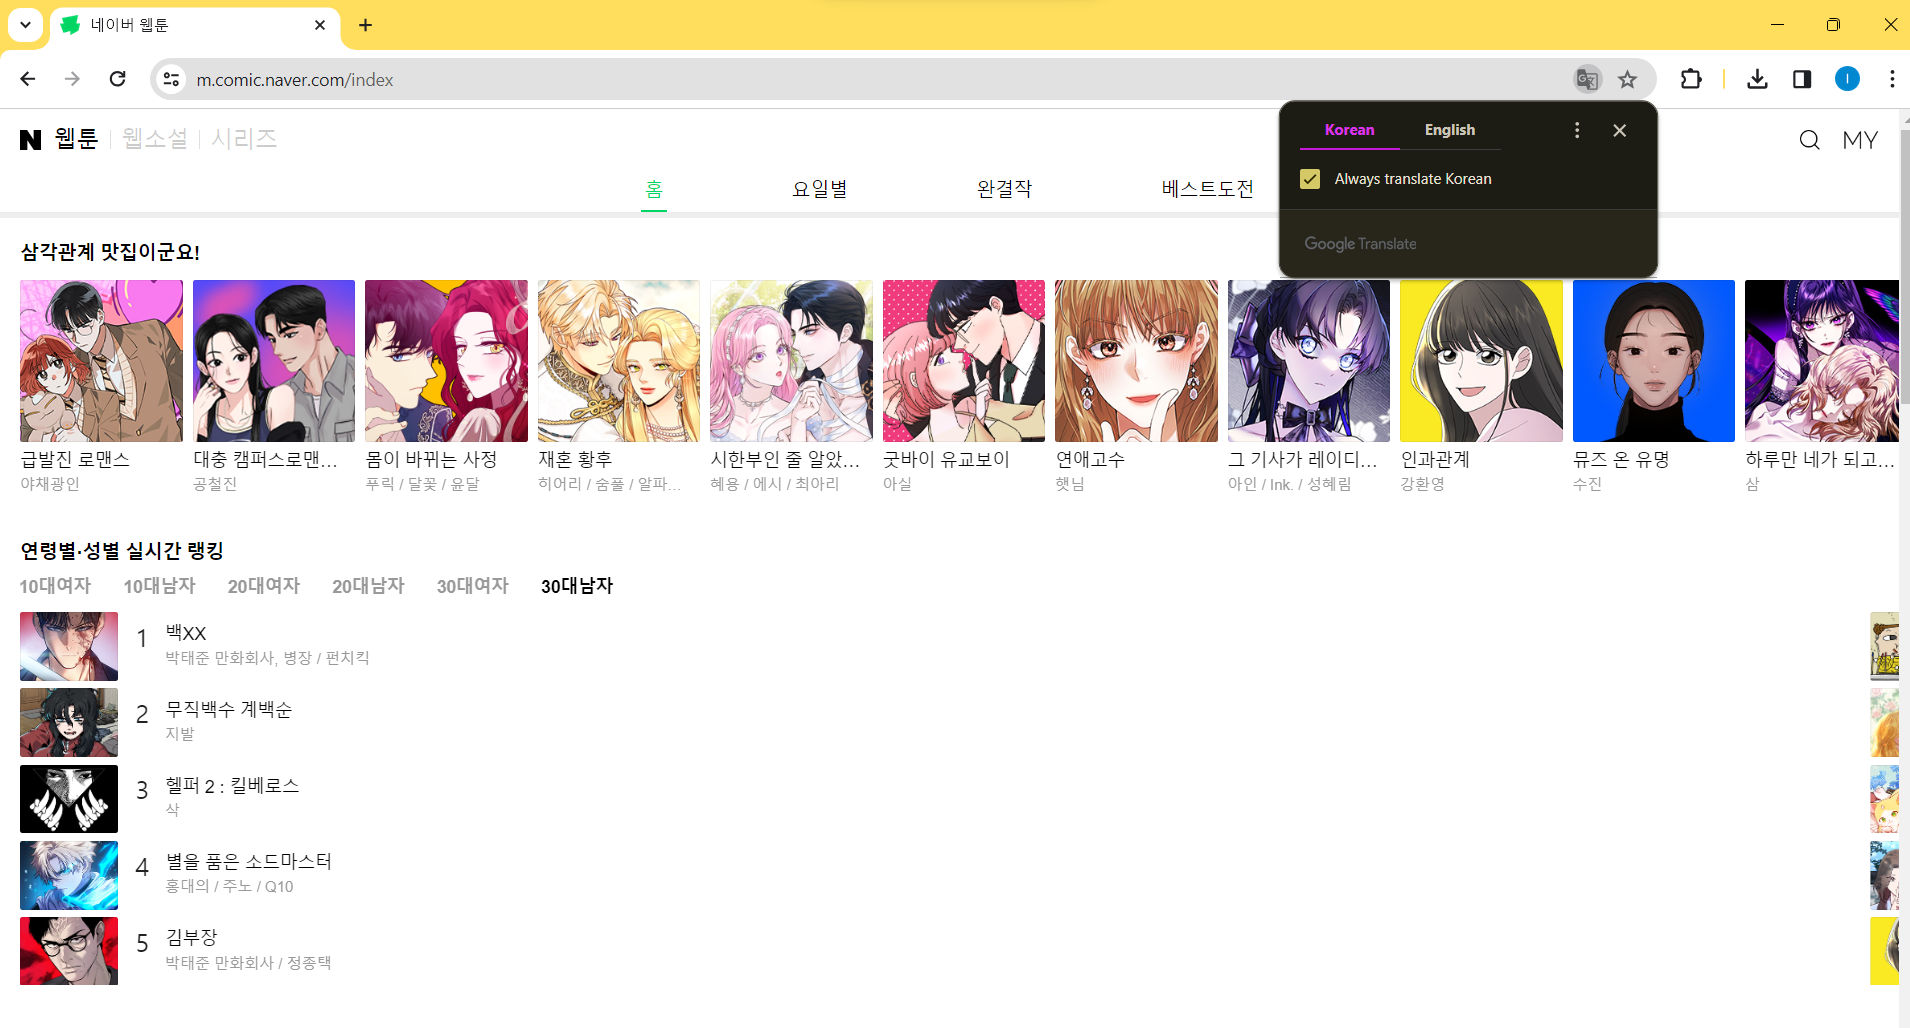 Home page of Line Webtoon Google Translate: Discover and read thousands of webcomics in various genres, translated into multiple languages.